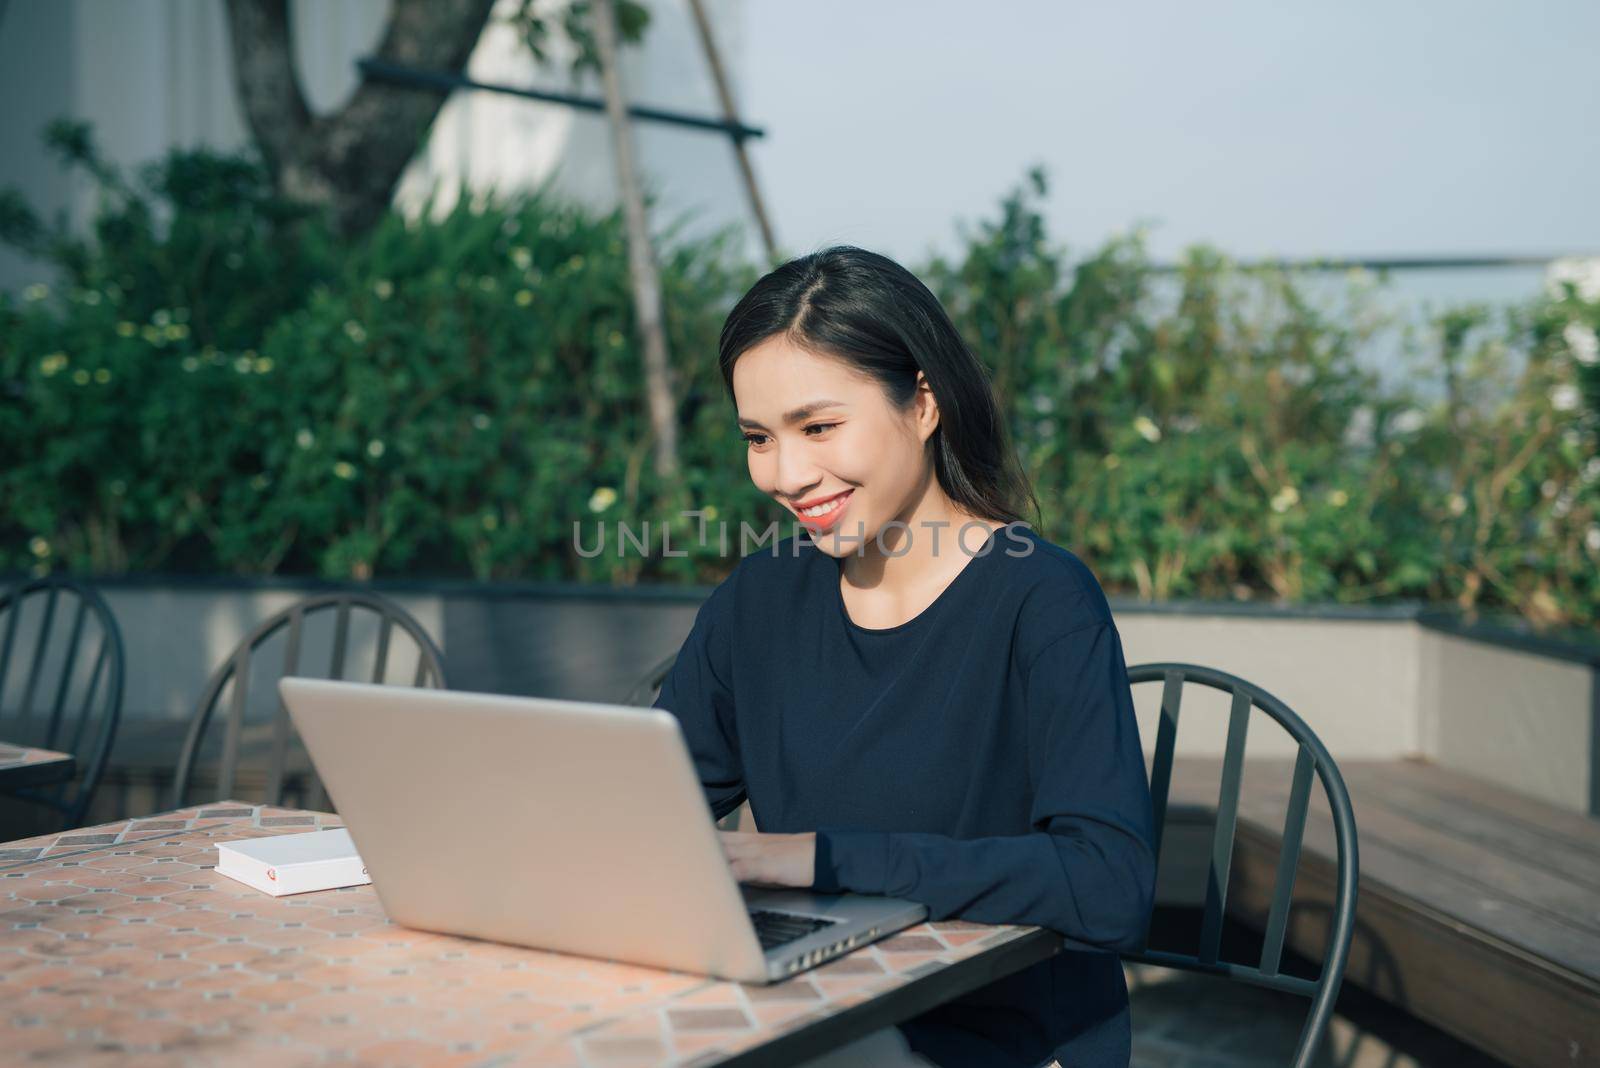 Taking advantages of free Wi-Fi. Beautiful young woman working on laptop and smiling while sitting outdoors by makidotvn